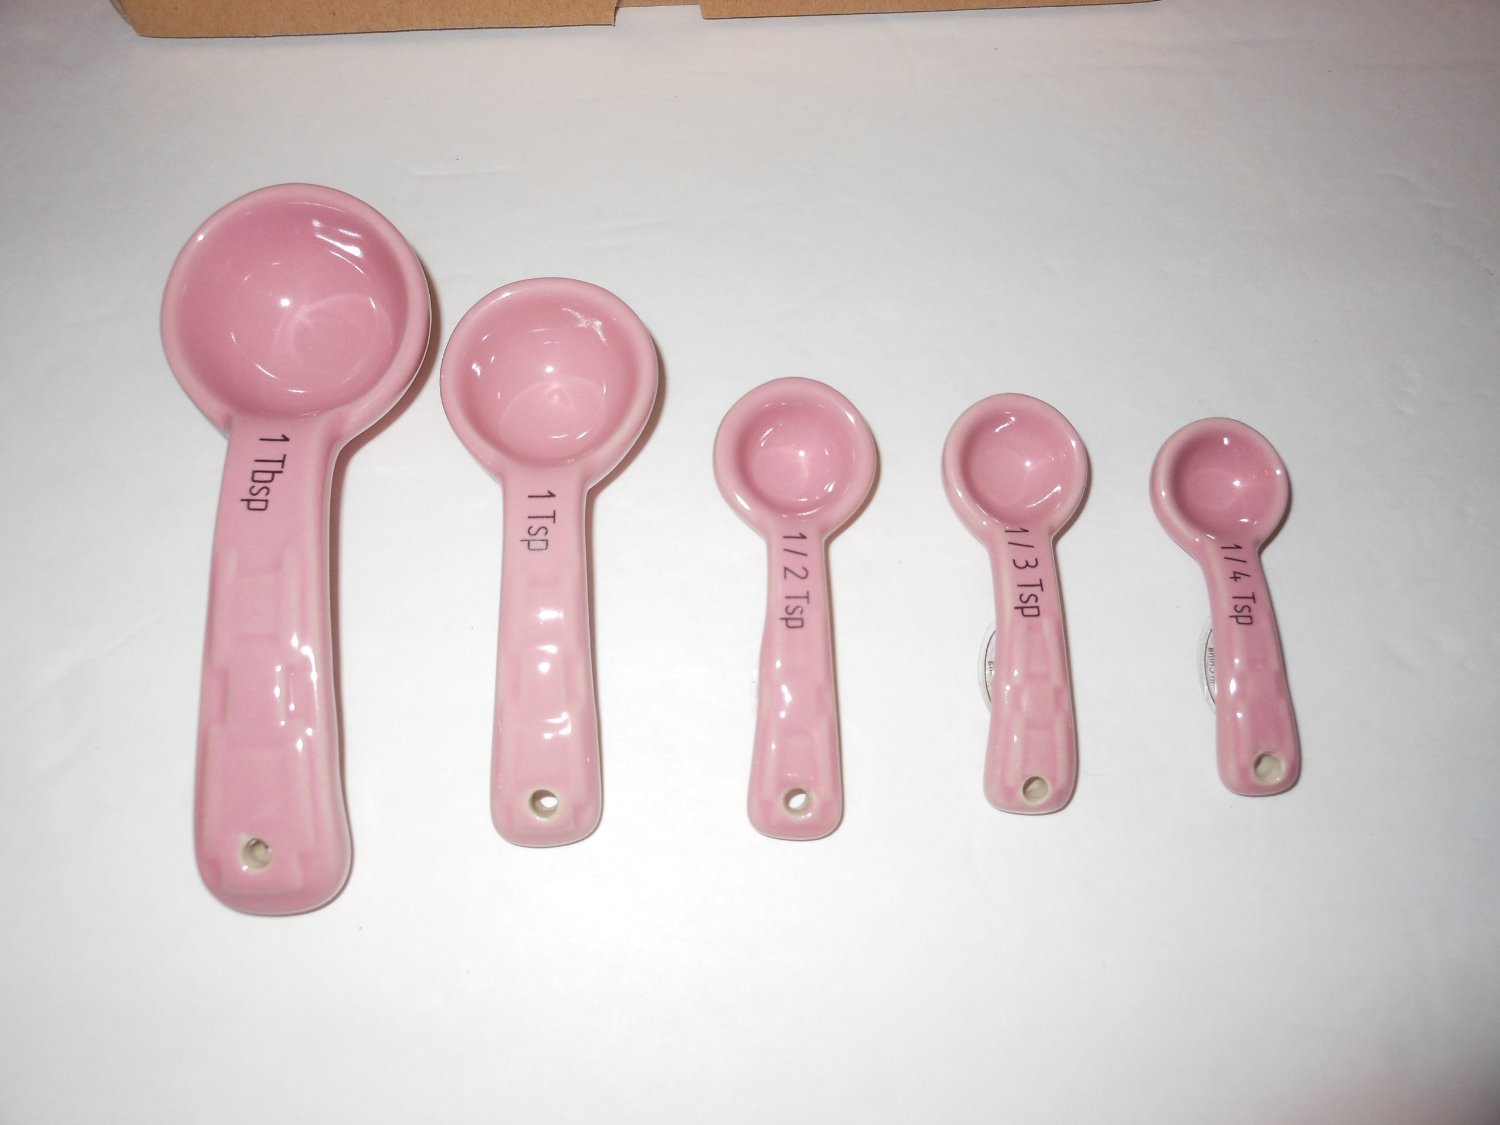 New Longaberger Woven Traditions Measuring Spoons Set - Pink!